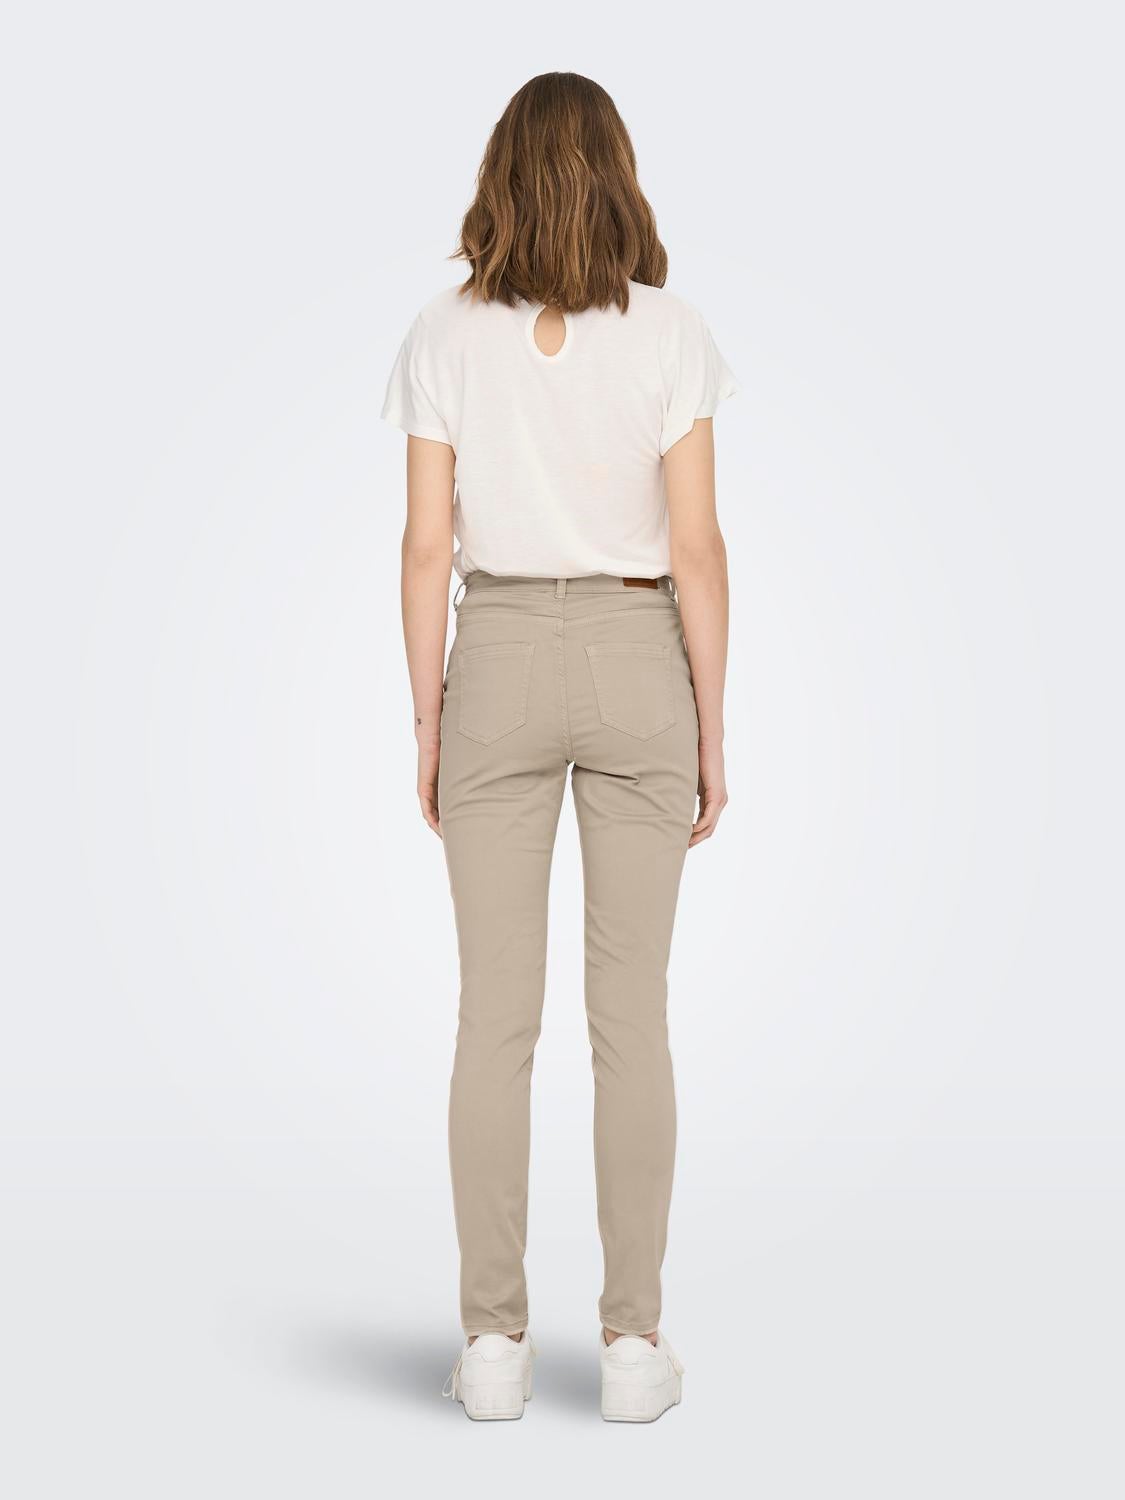 Paperbag Trench Trousers in (Re)generative Chino